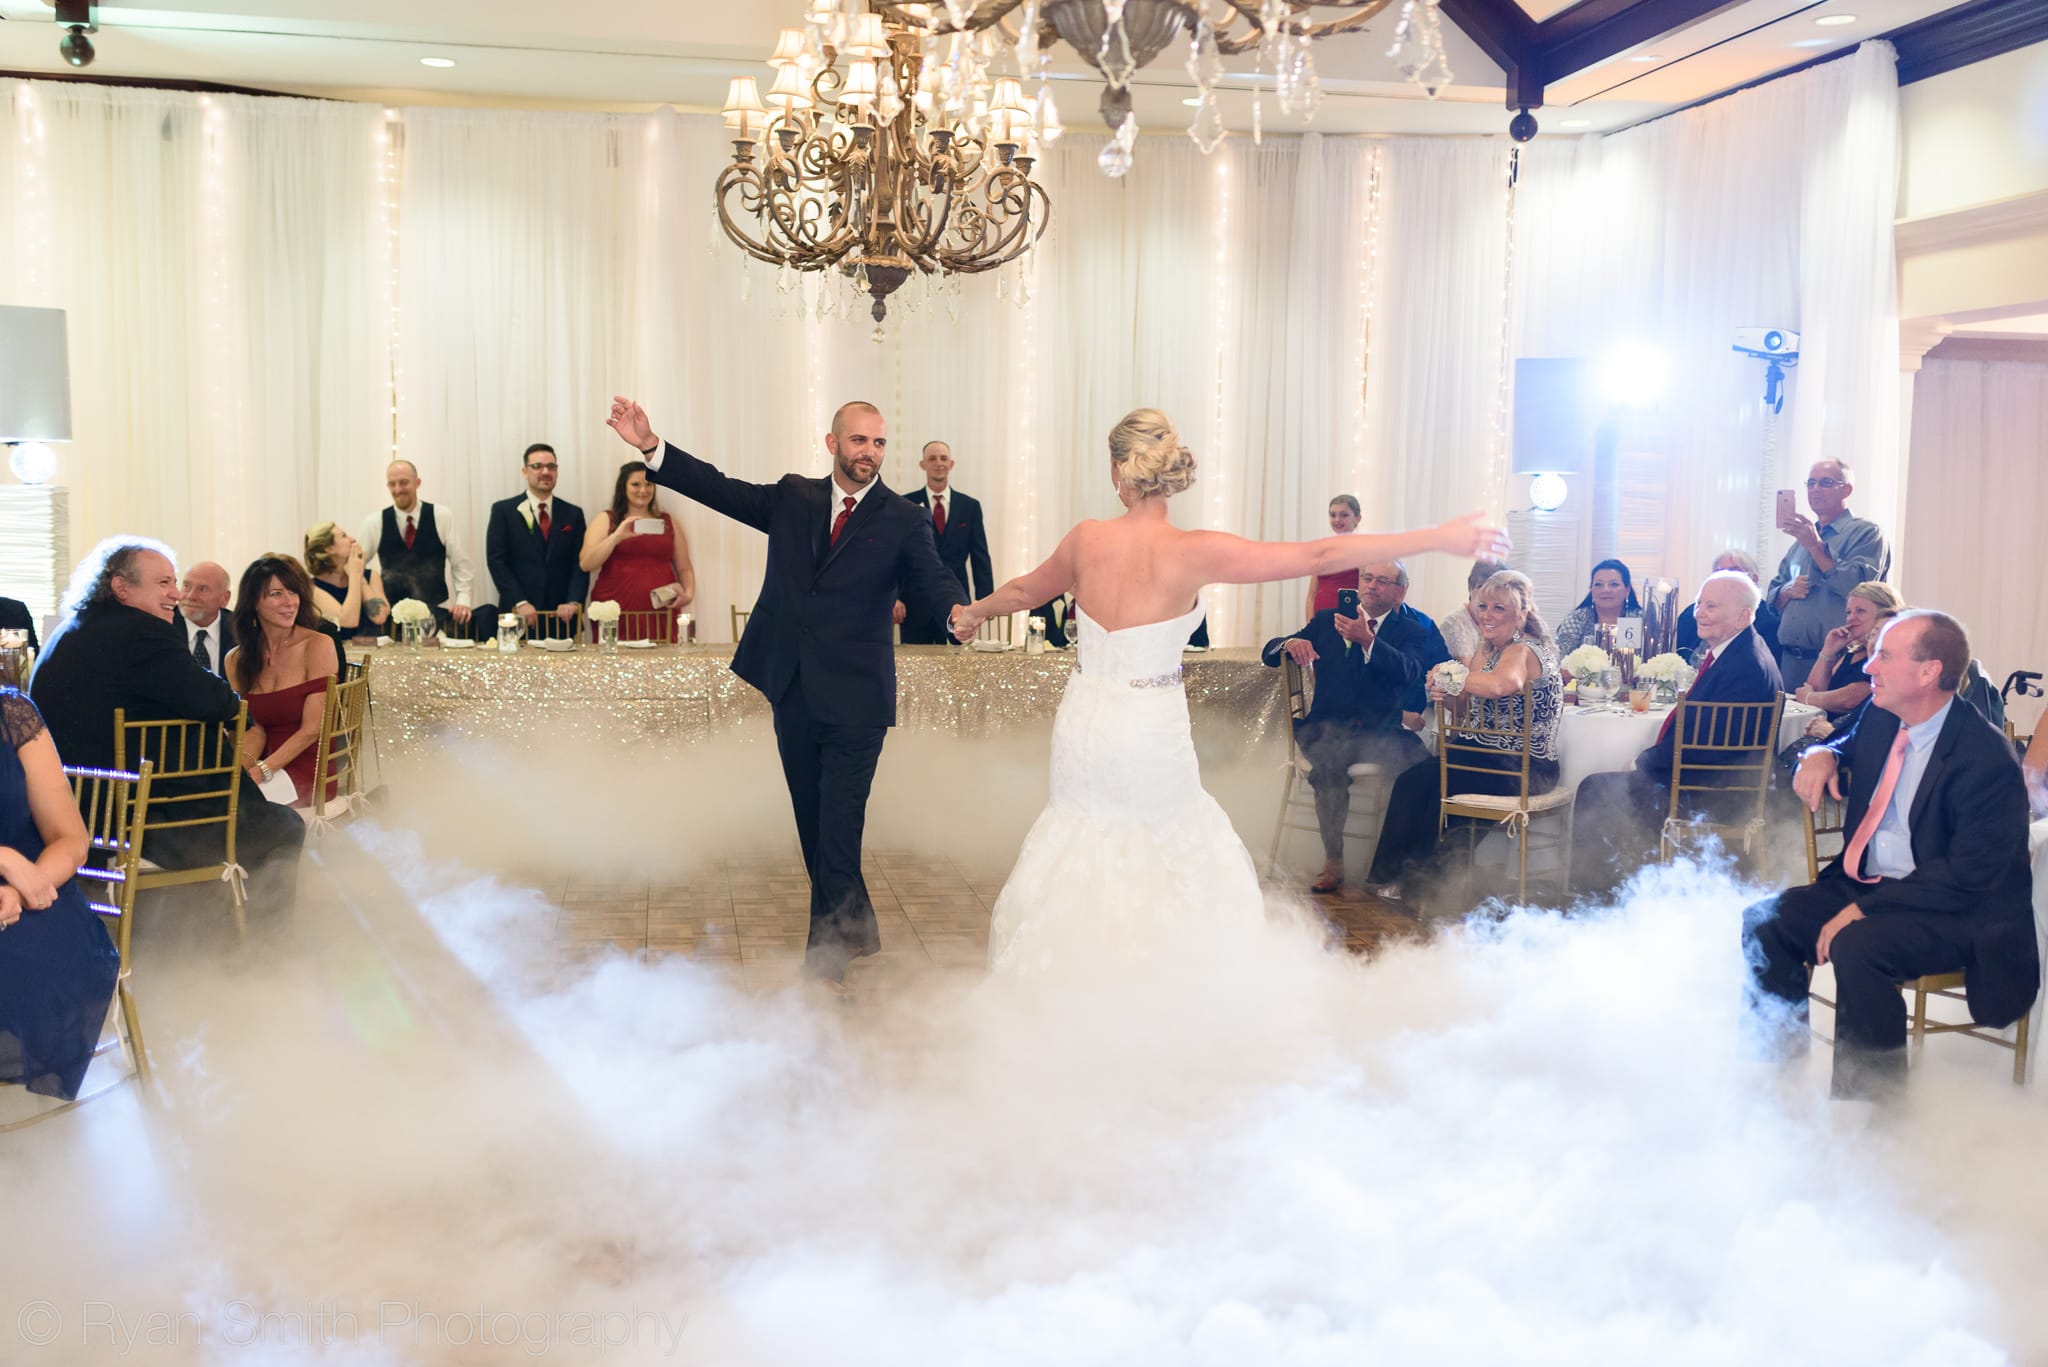 First dance with fog on the dance floor - Members Club - Grande Dunes